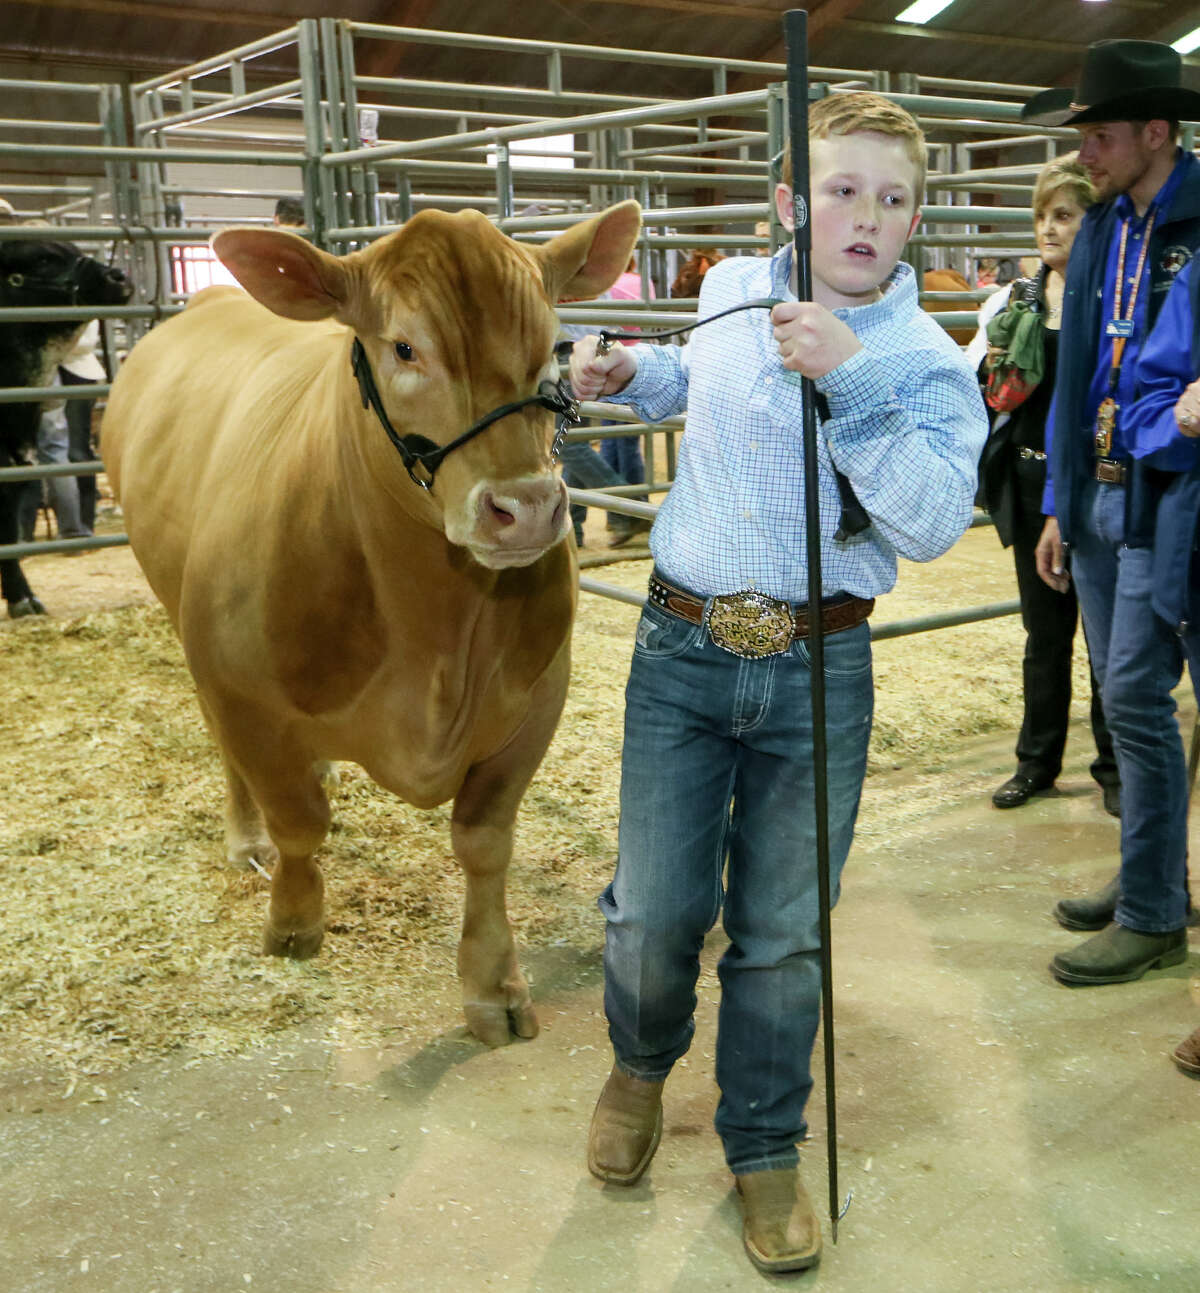 Tristan Himes, 11, from Sterling City, leads his Grand Champion Charolais steer, Nugget, to be photographed at the Freeman Coliseum Auction Barn on Saturday, Feb. 27, 2016. Nugget was sold for $105,000. MARVIN PFEIFFER/ mpfeiffer@express-news.net